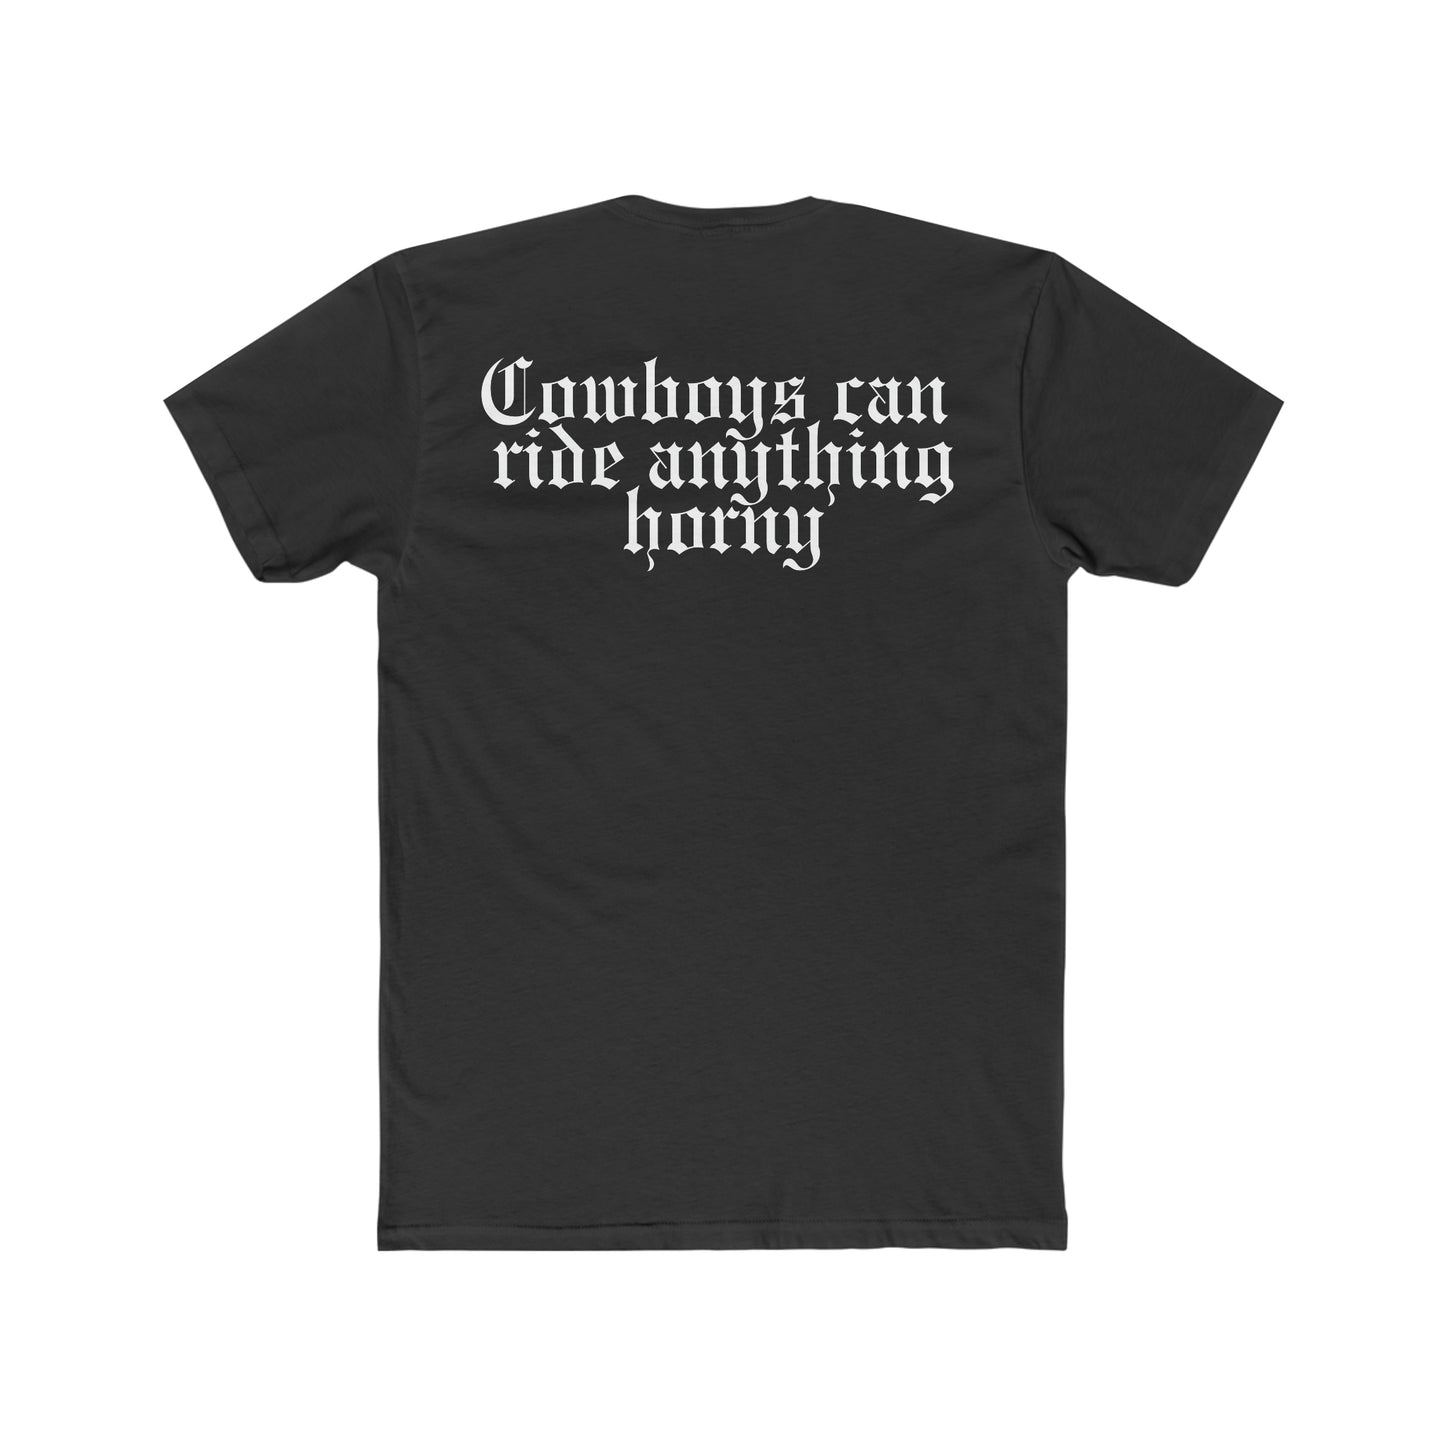 Cowboys Can Ride Anything Horny Graphic Crew Tee